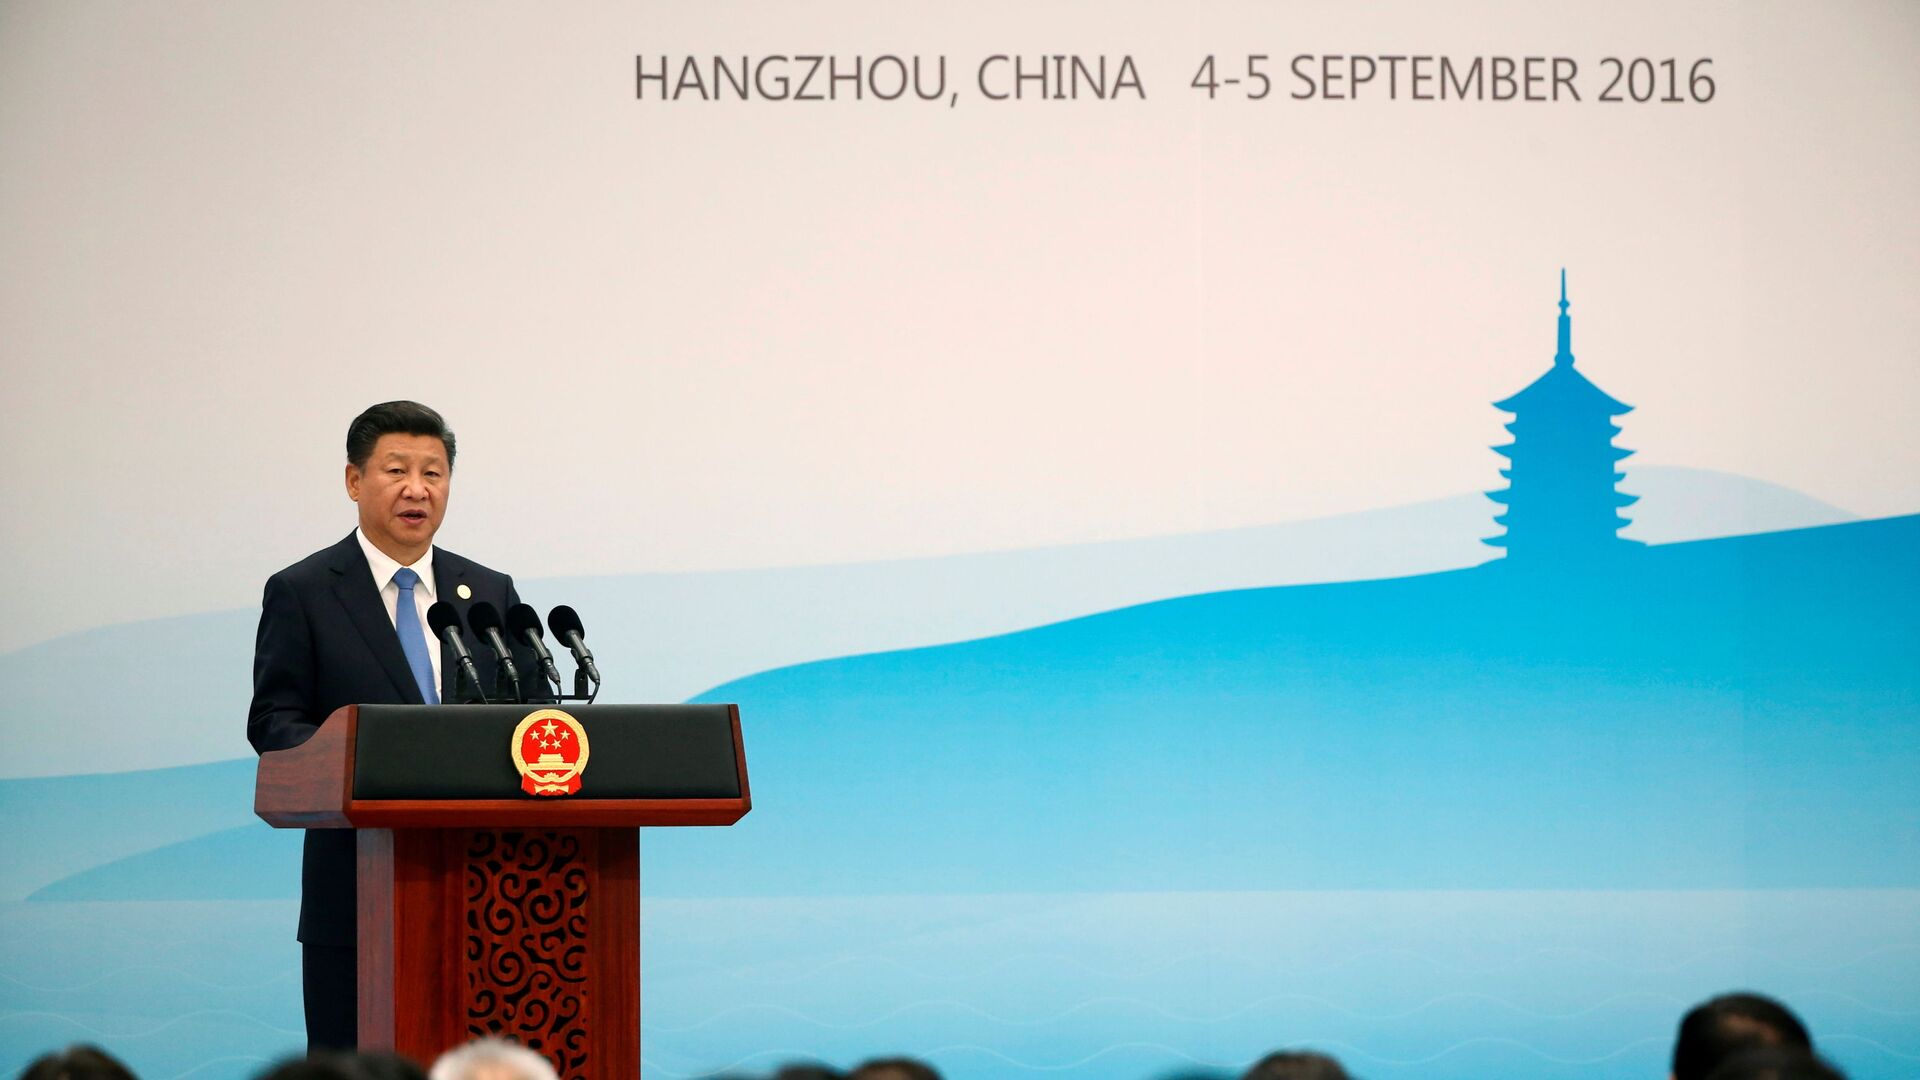 China's President Xi Jinping speaks at a news conference after the closing of G20 Summit in Hangzhou, Zhejiang Province, China, September 5, 2016. REUTERS/Damir Sagolj/File Photo - Sputnik International, 1920, 02.09.2021